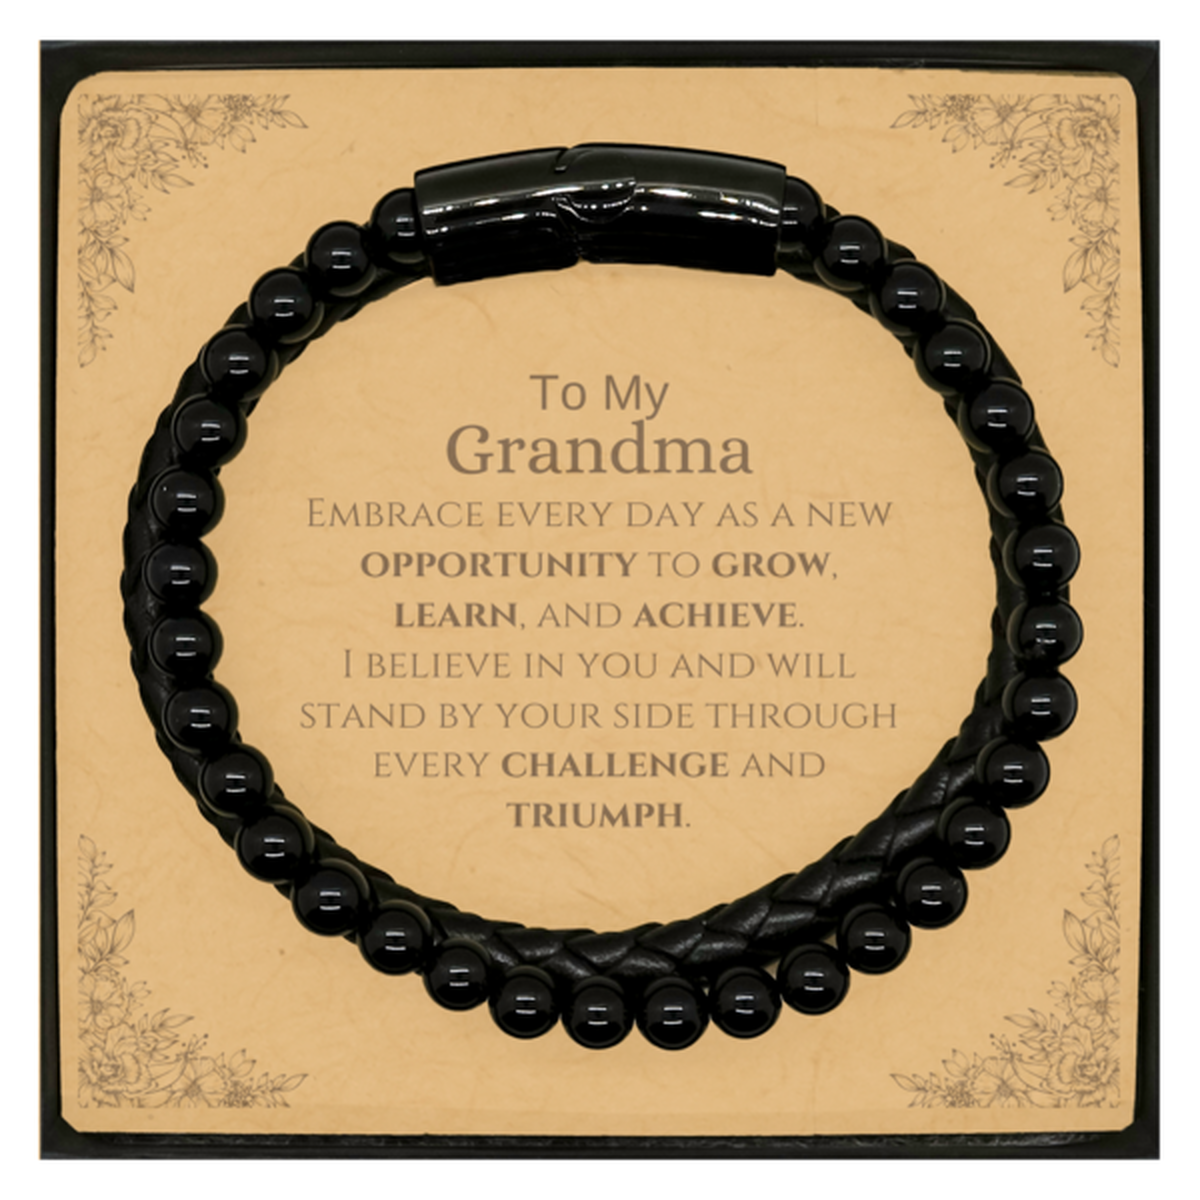 To My Grandma Gifts, I believe in you and will stand by your side, Inspirational Stone Leather Bracelets For Grandma, Birthday Christmas Motivational Grandma Gifts